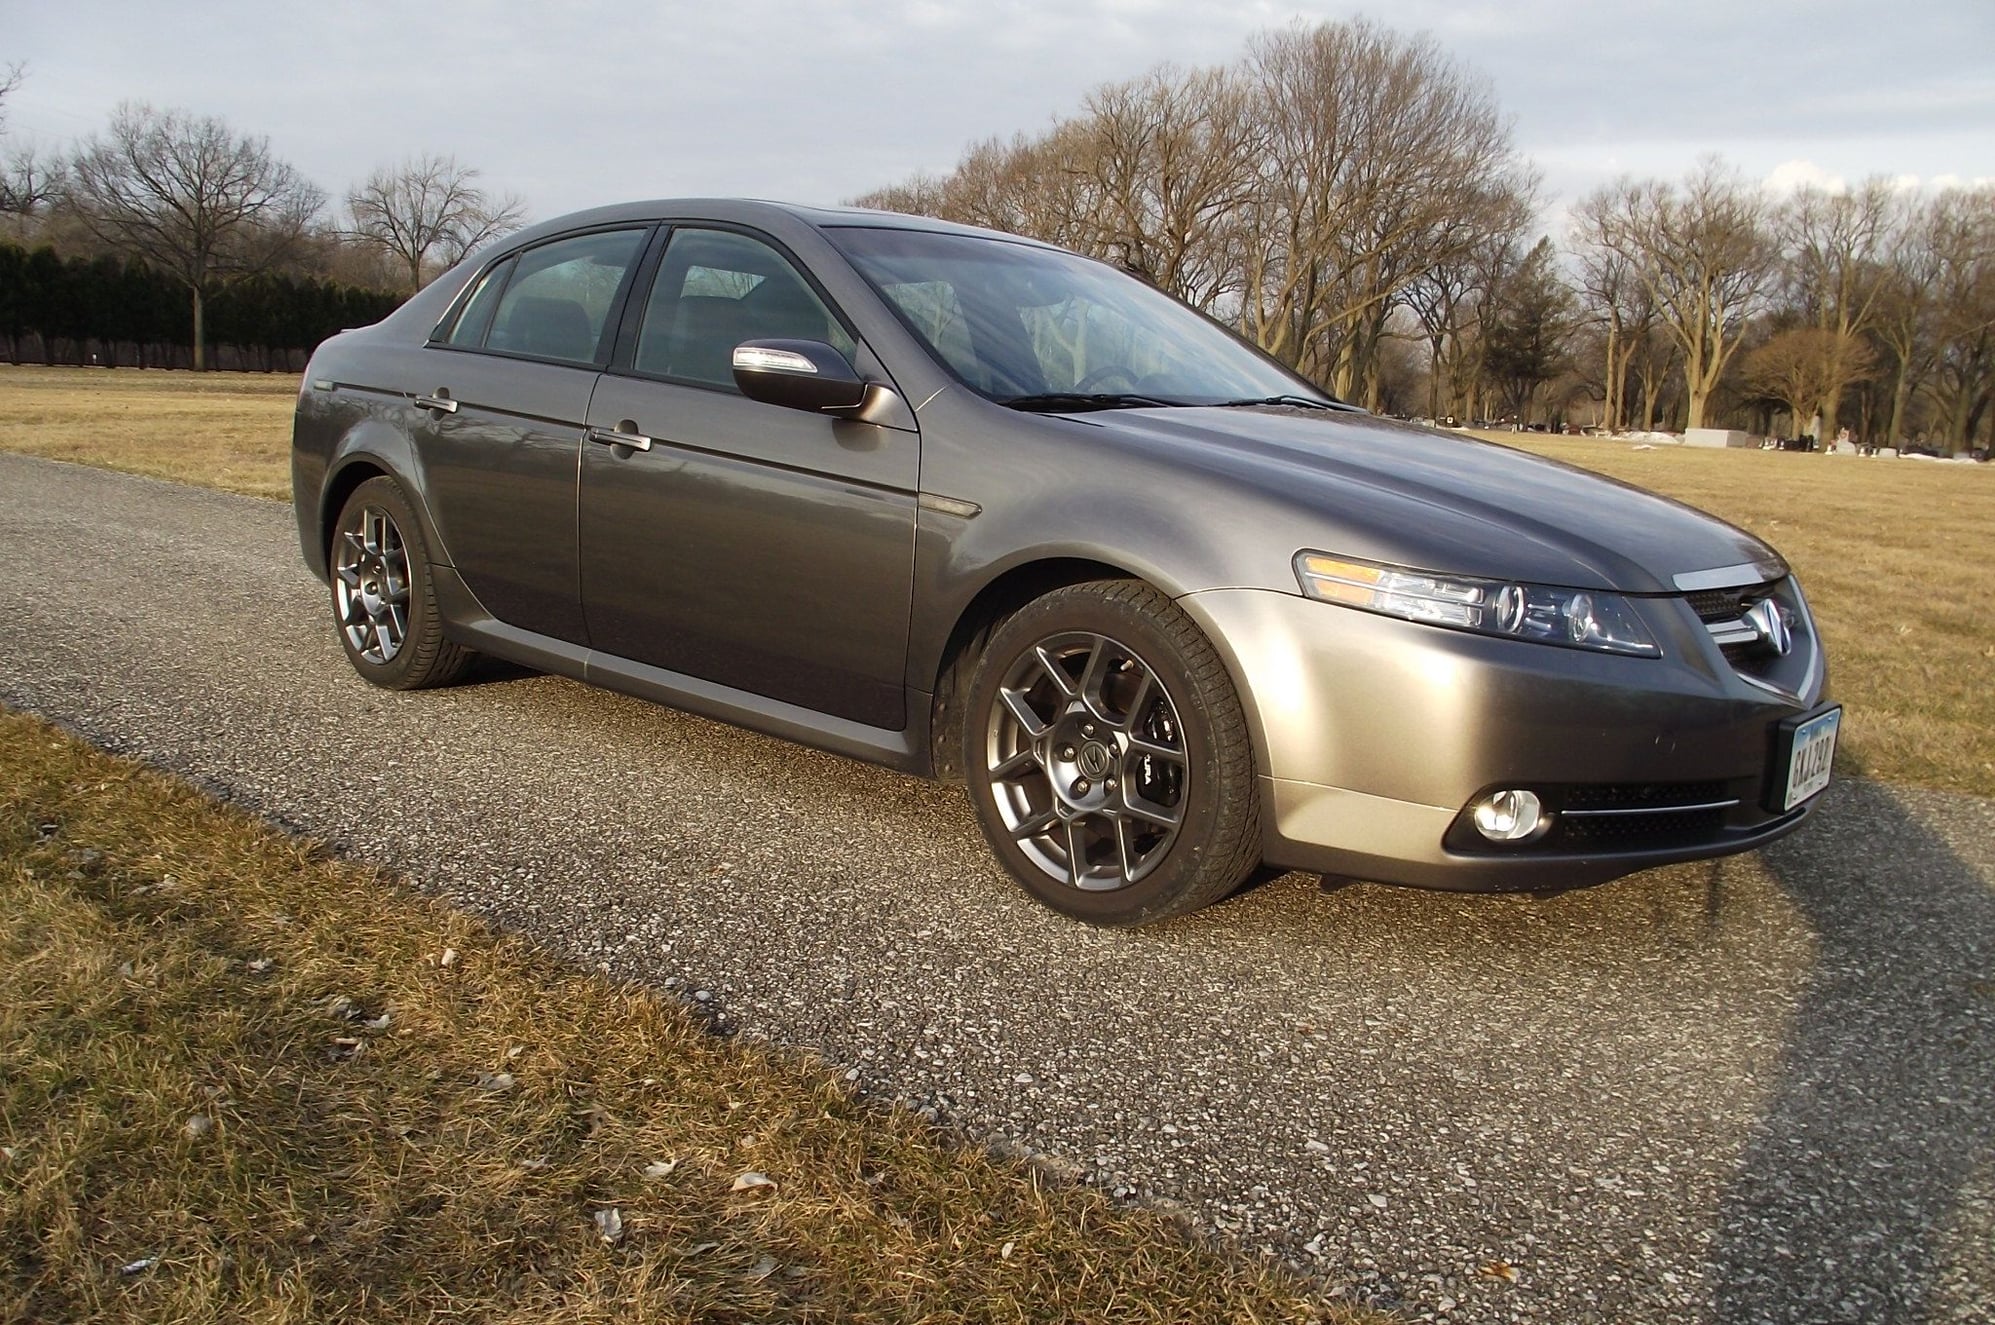 2008 Acura TL - SOLD: 2008 Acura TL Type S   83,000 miles! A/T - Used - VIN 19UUA76538A004416 - 83,000 Miles - 6 cyl - 2WD - Automatic - Sedan - Other - Charles City, IA 50616, United States